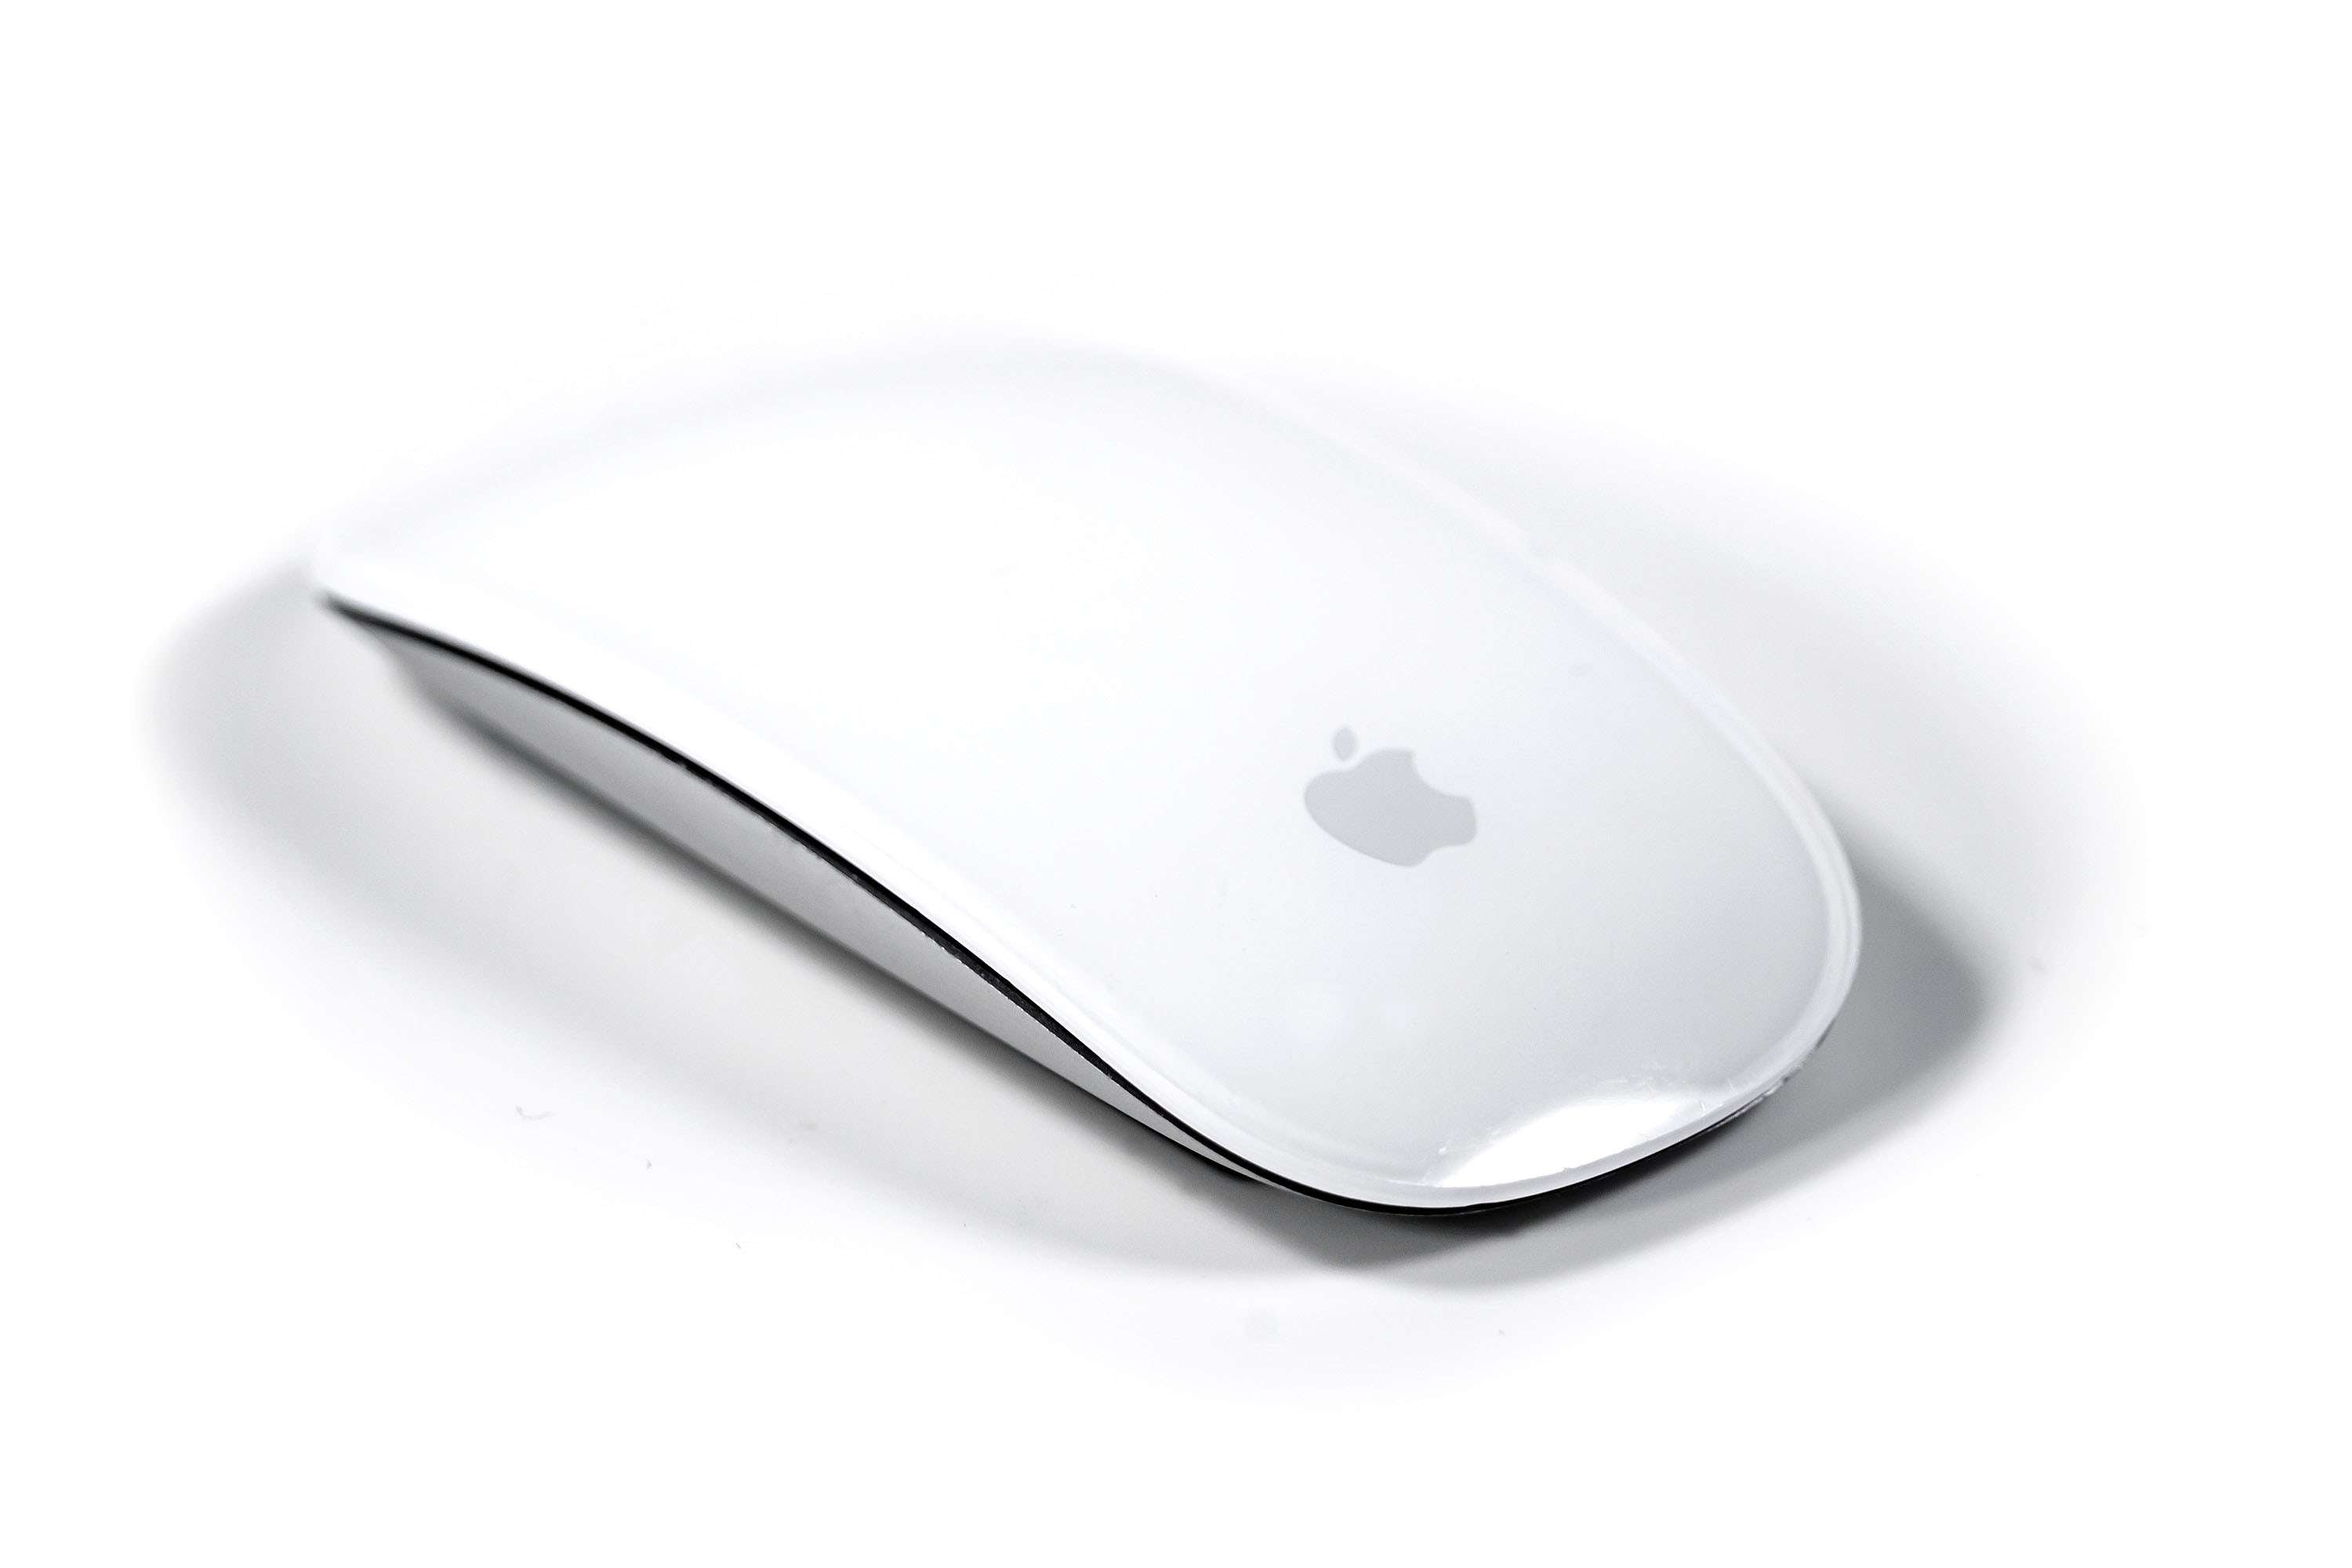 Buy Used & Refurbished Apple Magic Mouse Bluetooth Wireless A1296 MB829AM/A  - Apple Accessories | Laser-Mäuse